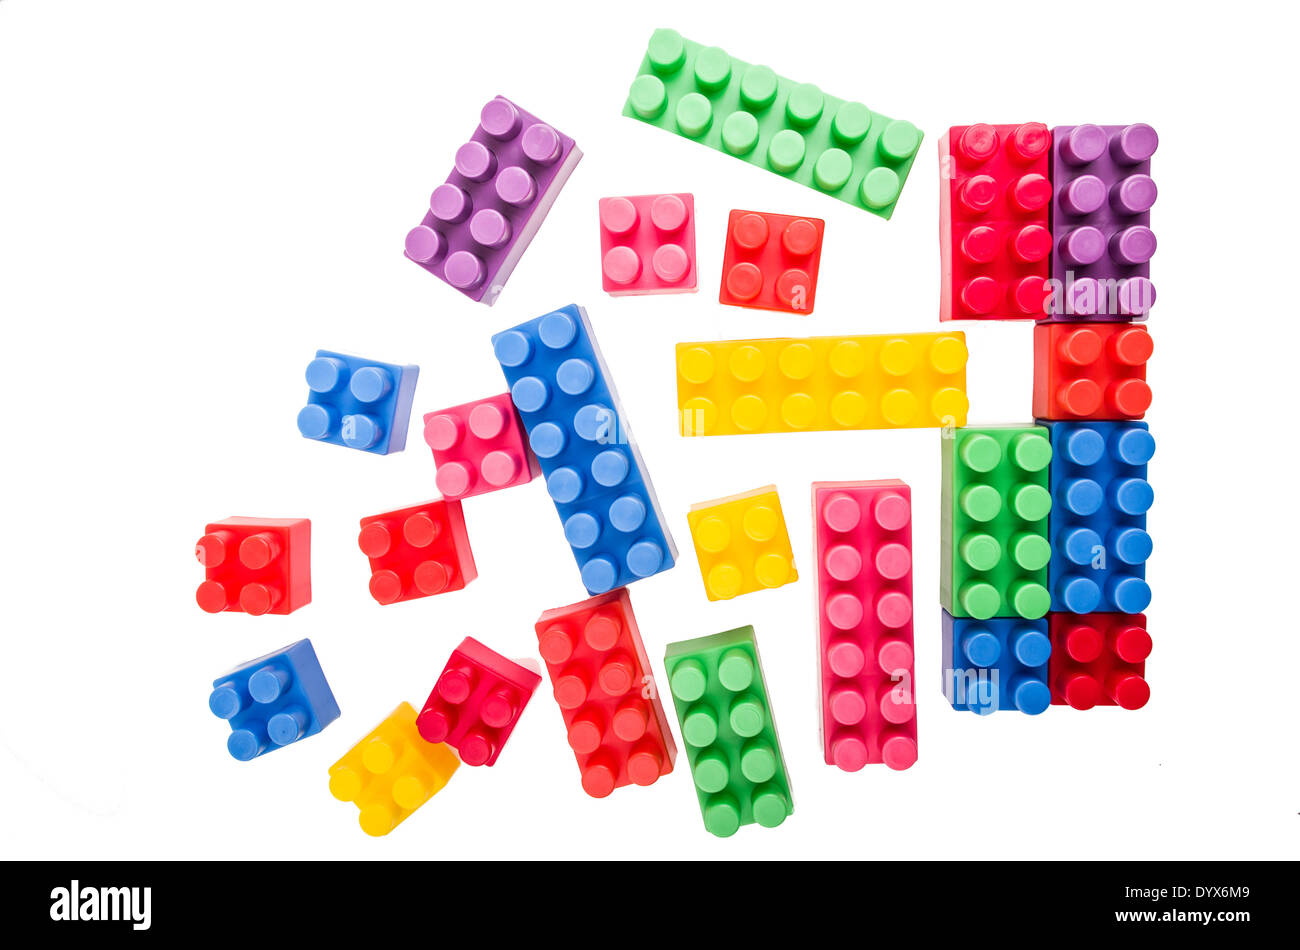 building blocks forming a square on a white background Stock Photo